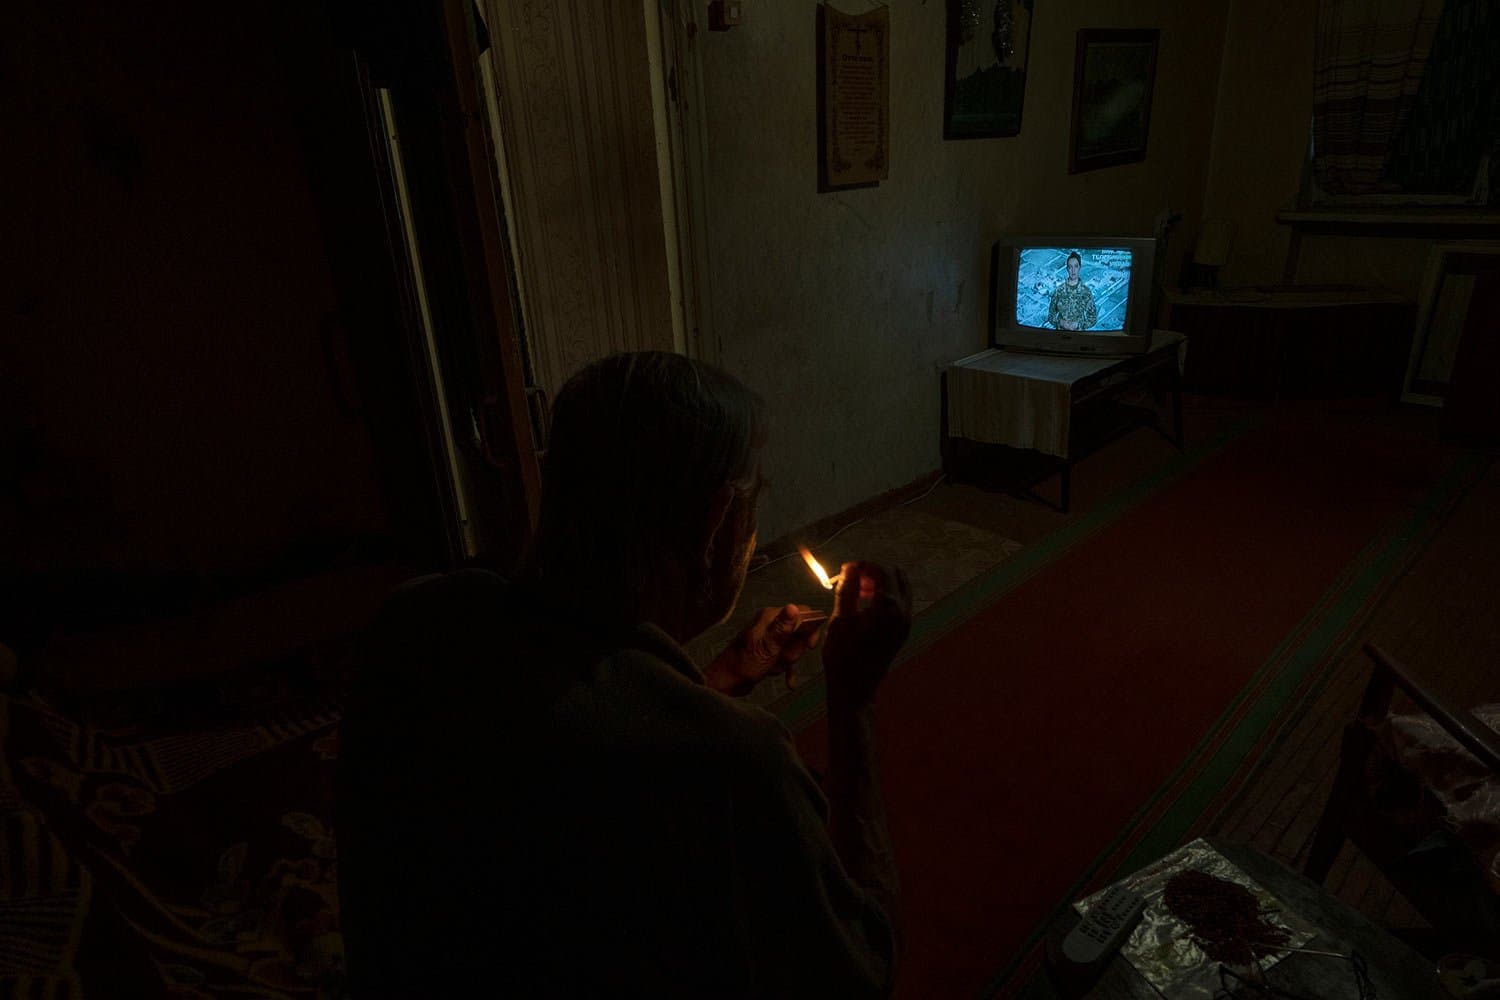 Seventy-year-old pensioner Valerii Ilchenko, who lives alone and is refusing to evacuate, watches television in his apartment, in Kramatorsk